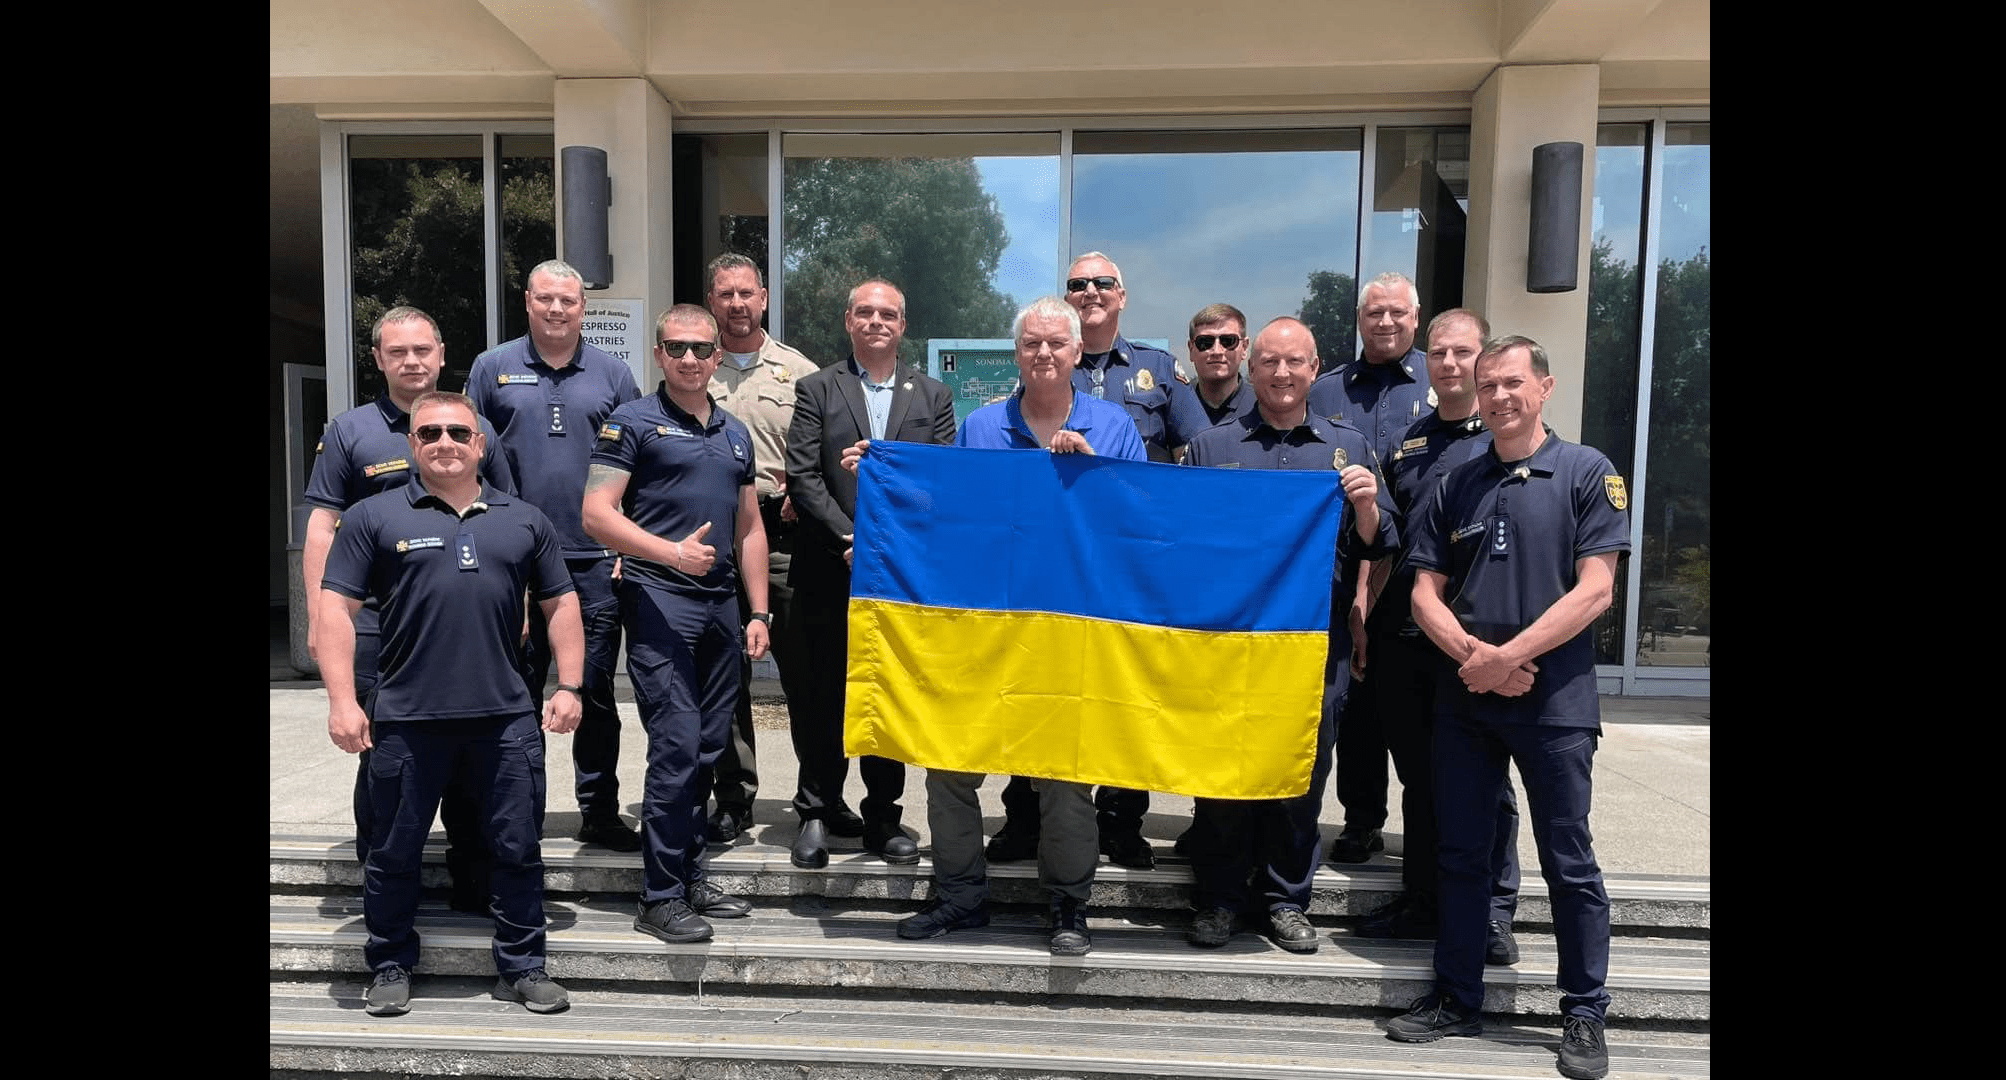 ukrainian-first-responders-with-sonoma-county-fire-district-sonoma-county-fire-district